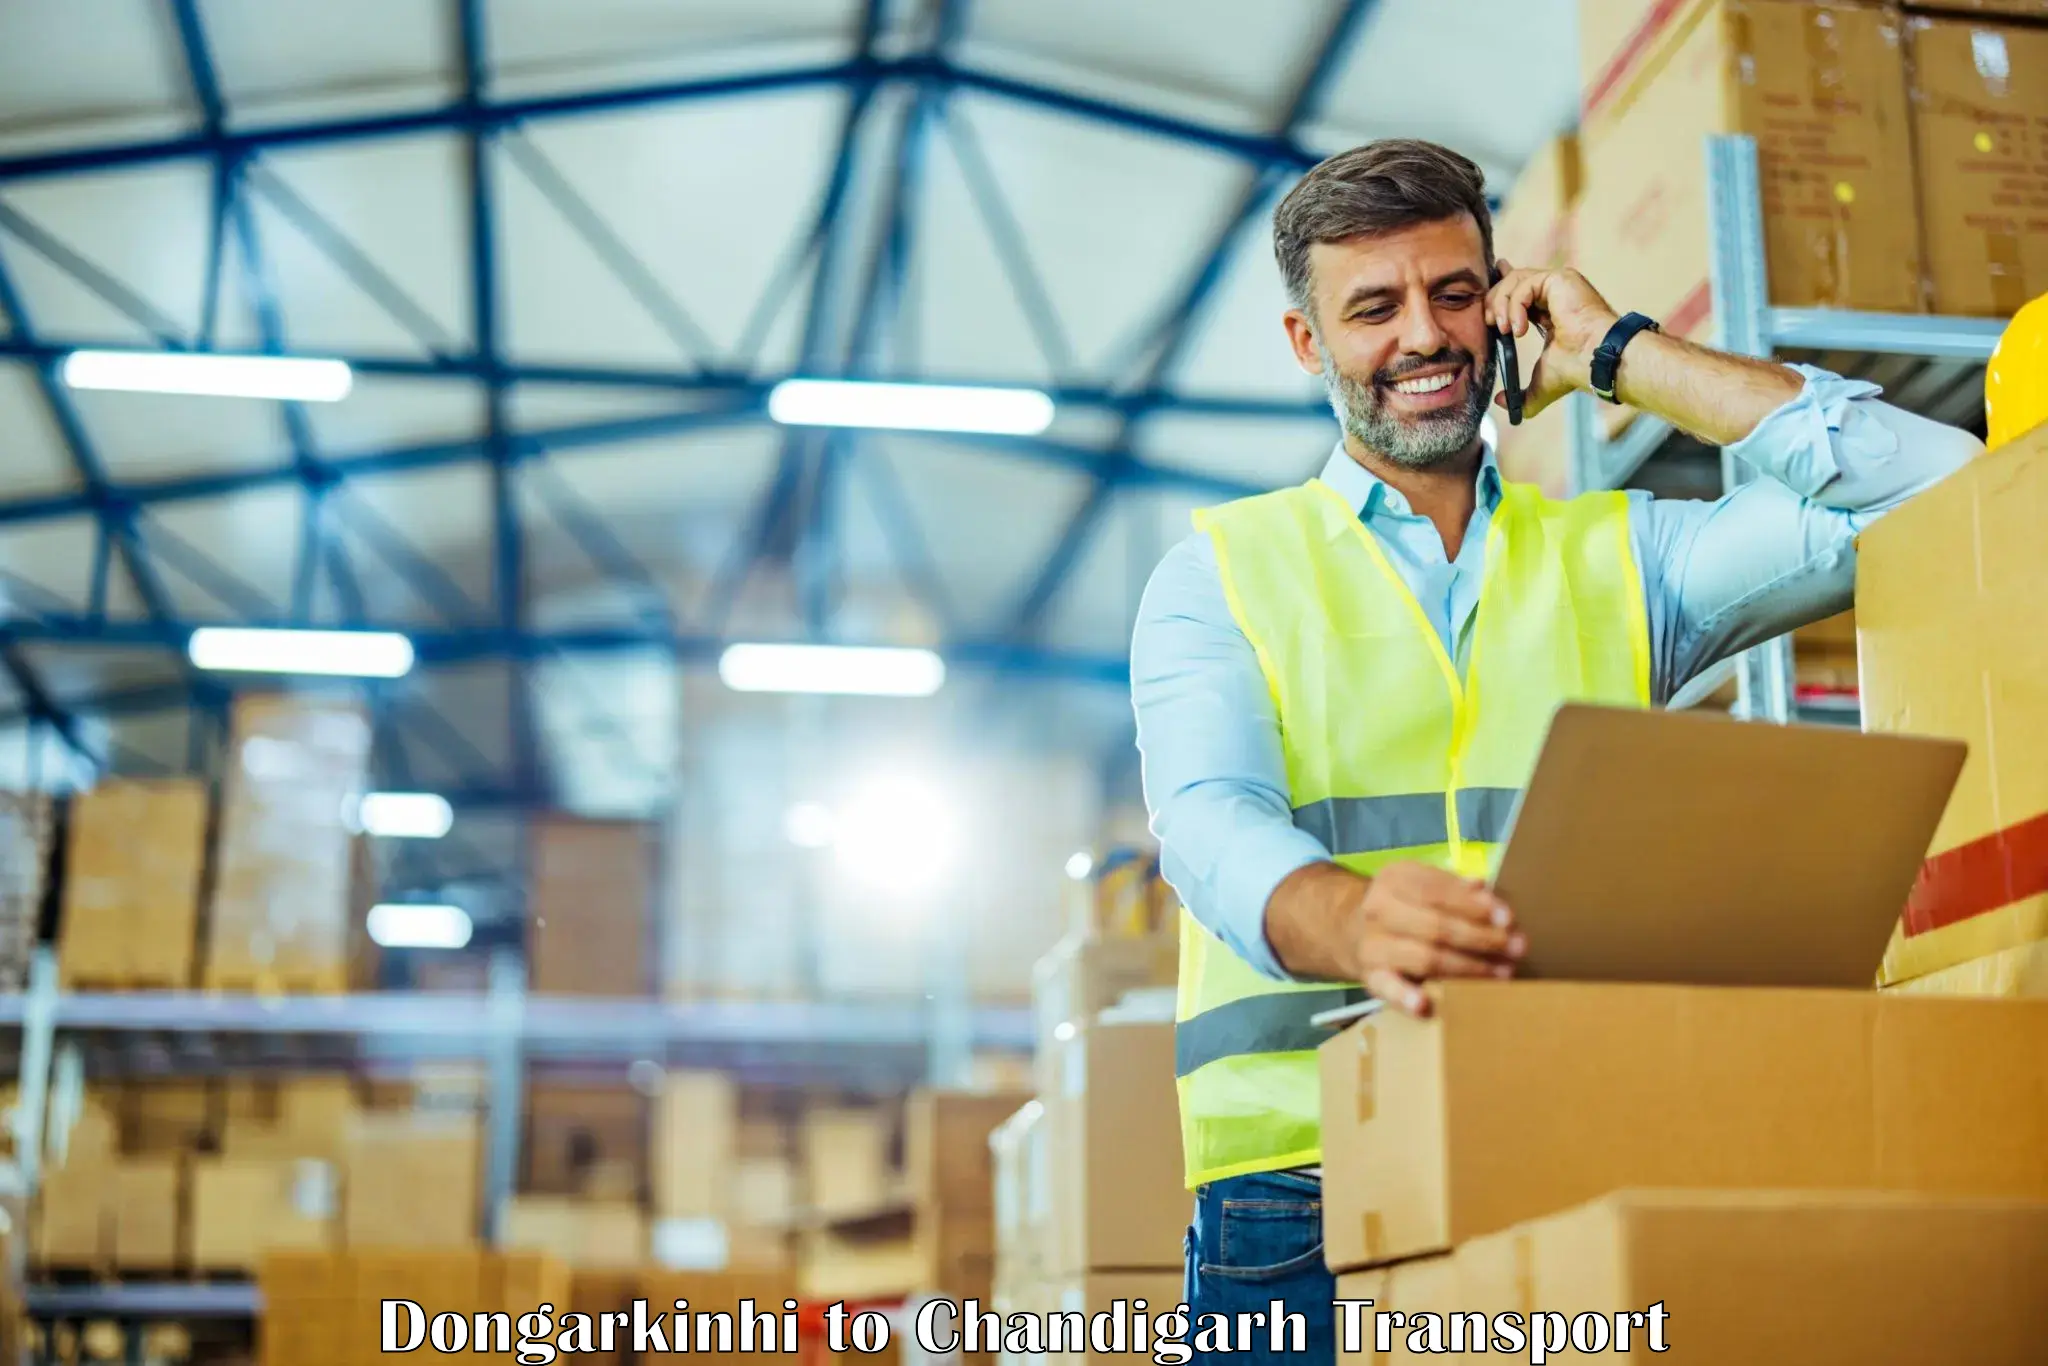 Air cargo transport services Dongarkinhi to Chandigarh